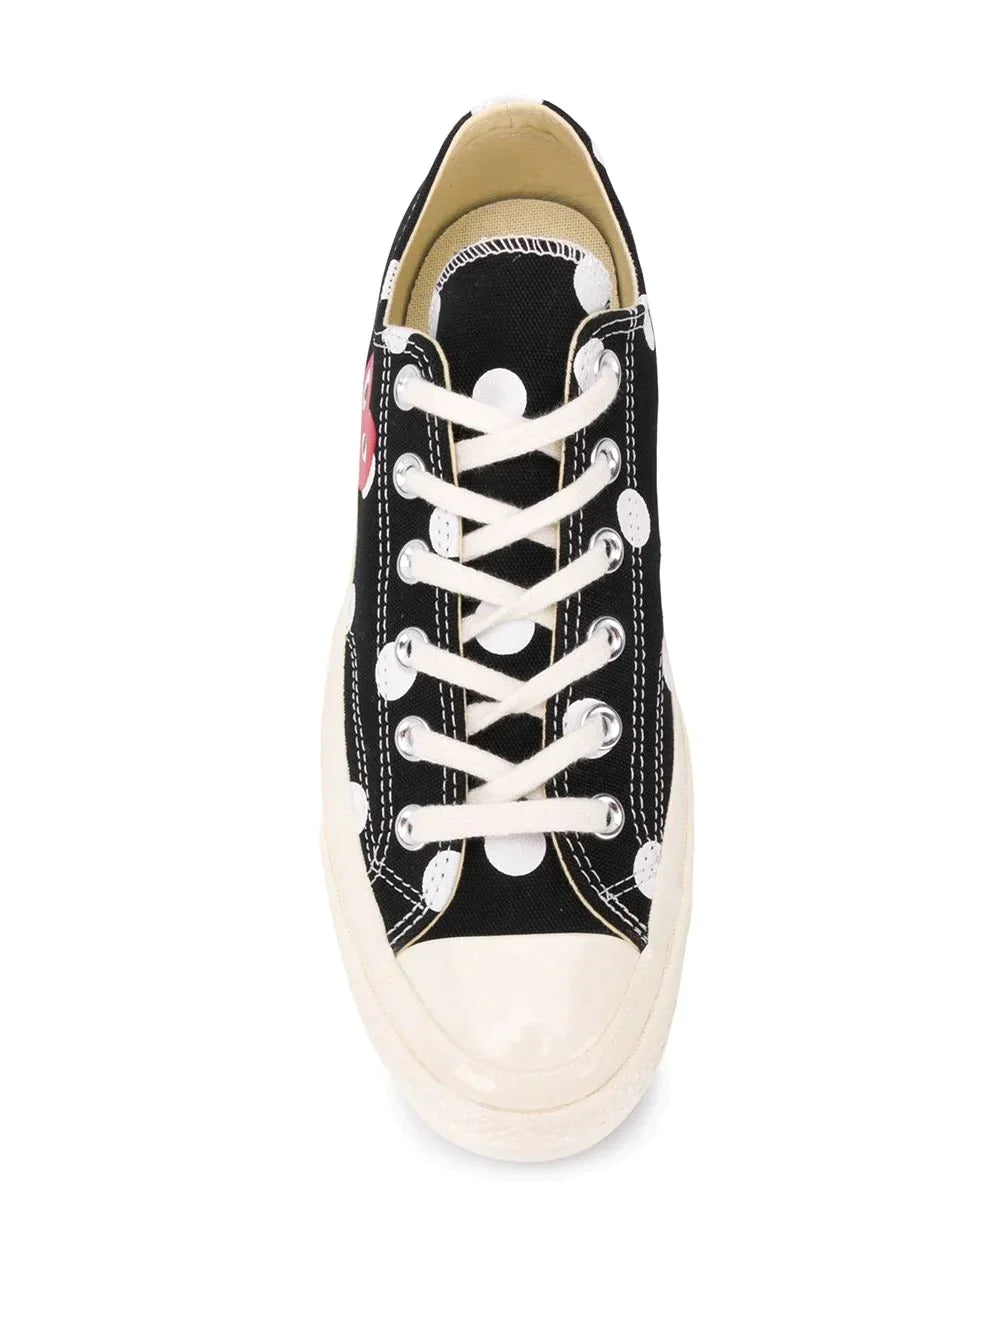 COMME-des-GARCONS-PLAY-Converse-Converse-Low-Cut-With-Polka-Dot-Sneakers-Black-3